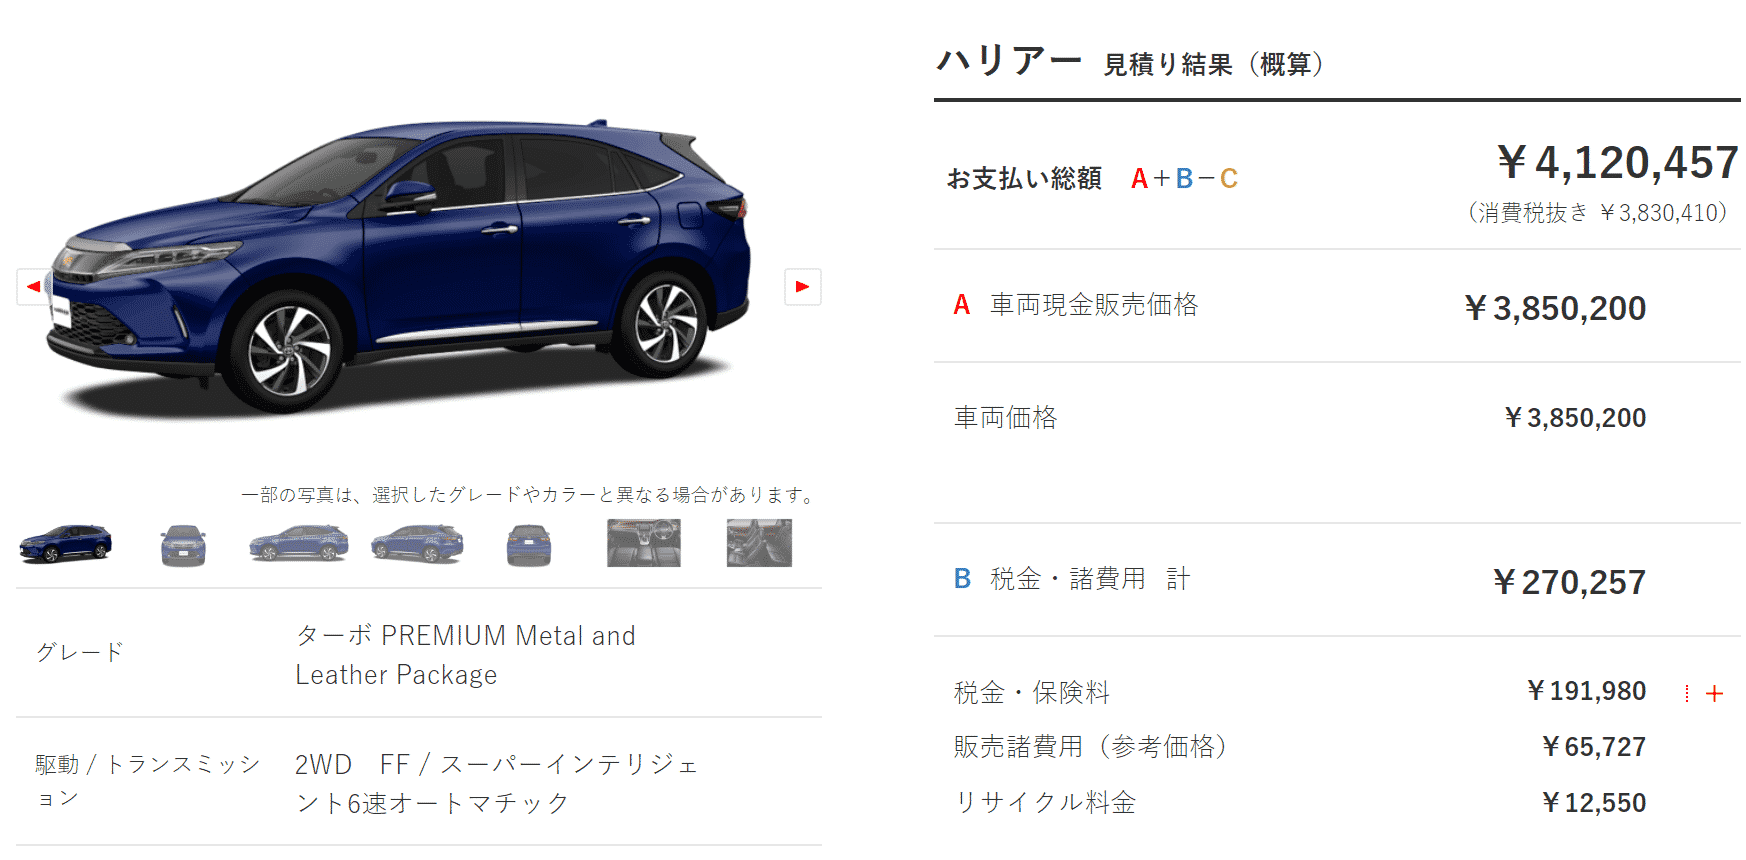 「PREMIUM “Metal and Leather Package”」ターボ車の支払い総額目処の画像